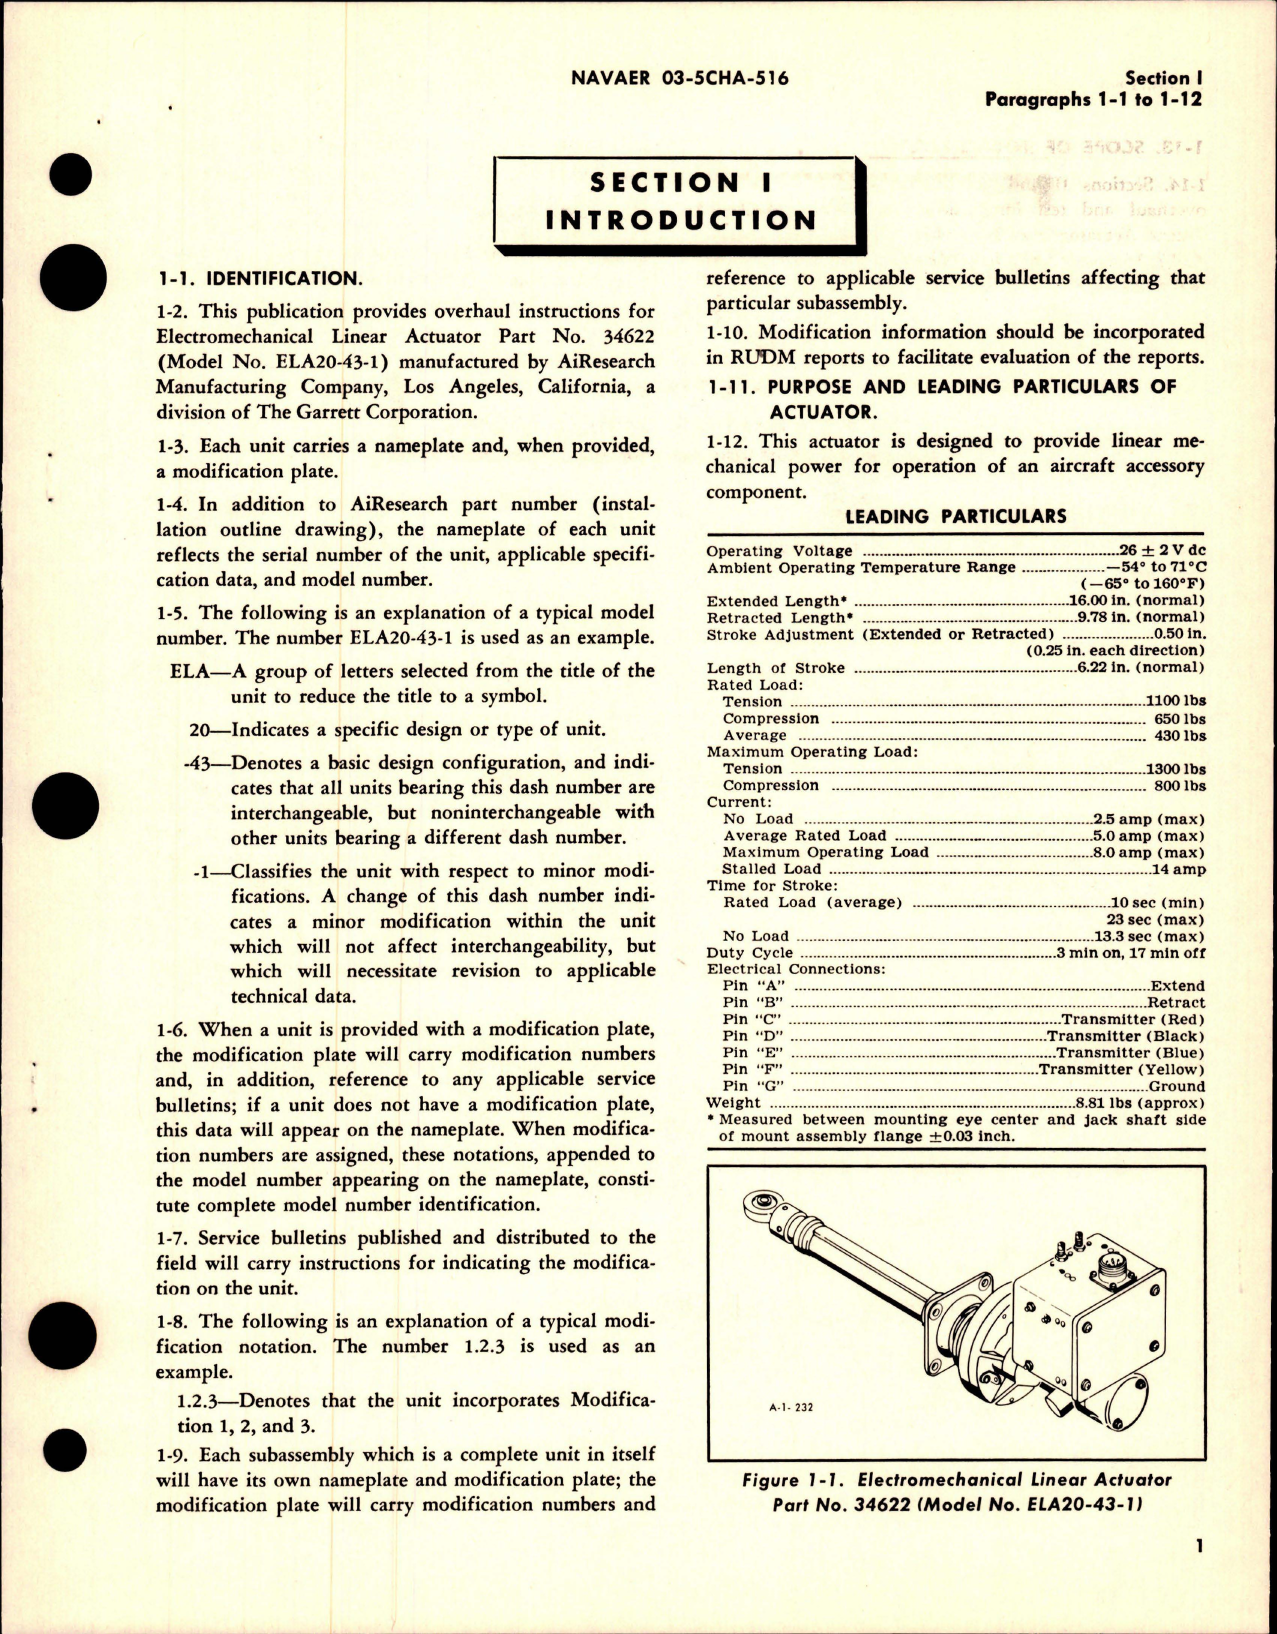 Sample page 5 from AirCorps Library document: Overhaul Instructions for Electromechanical Linear Actuator - Part 34622 - Model ELA20-43 